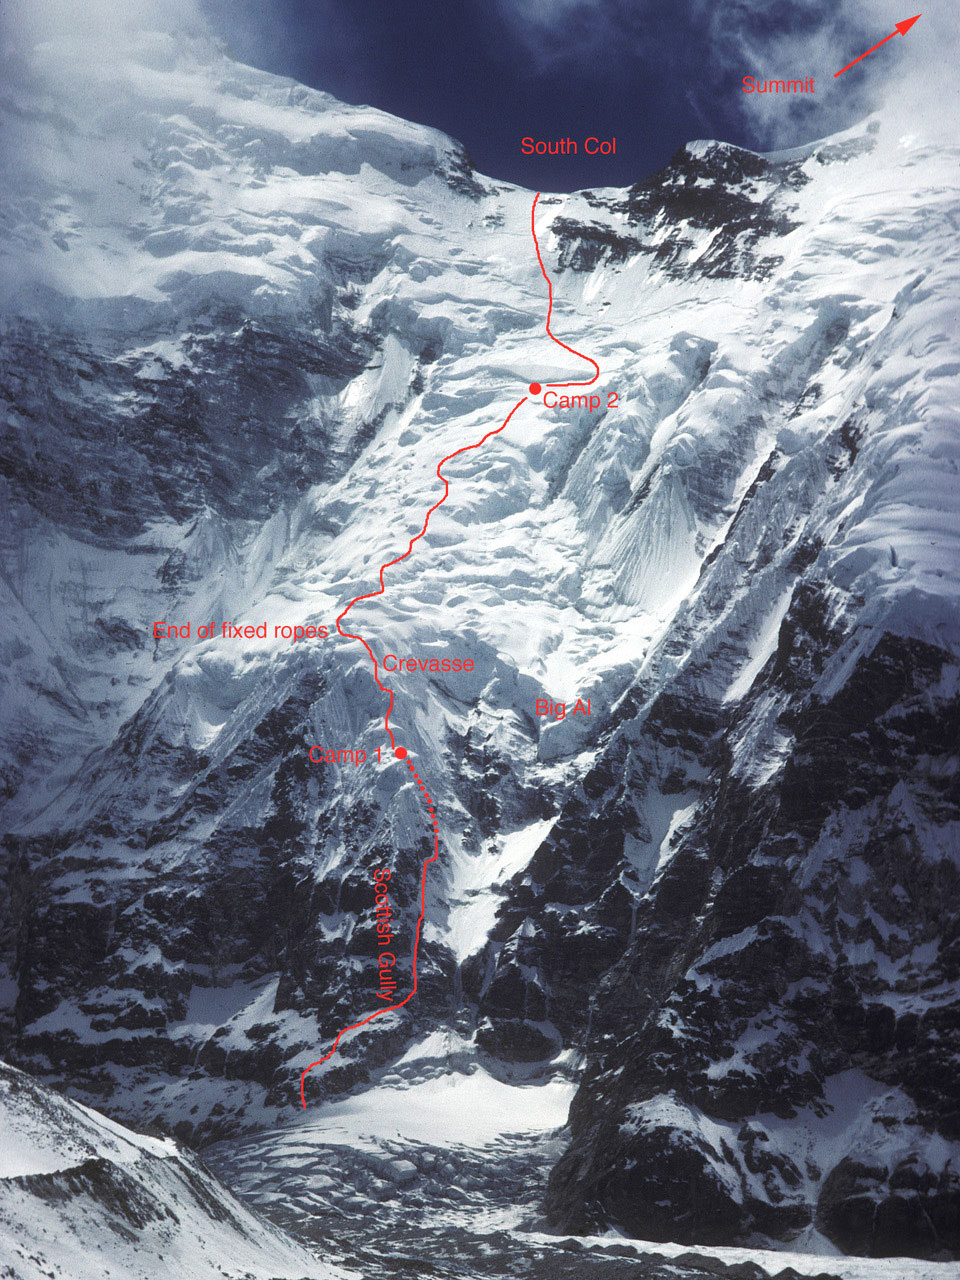 The Kangshung Face Route, Mt. Everest (Chomolungma), 1988. [Photo] Stephen Venables